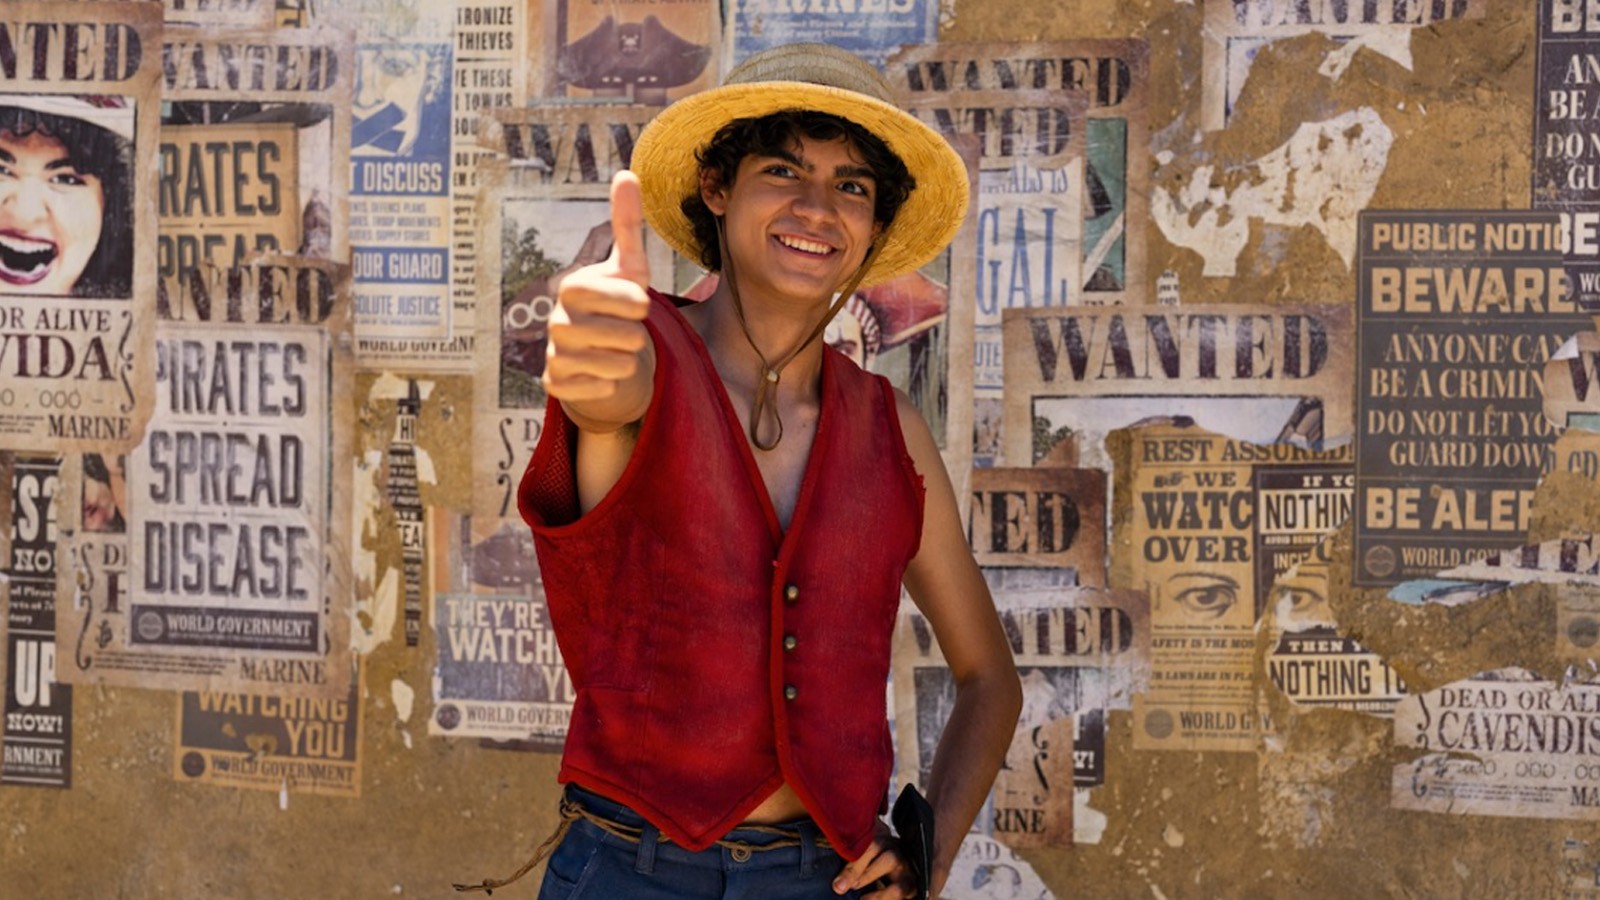 Monkey D. Luffy in One Piece Live-Action